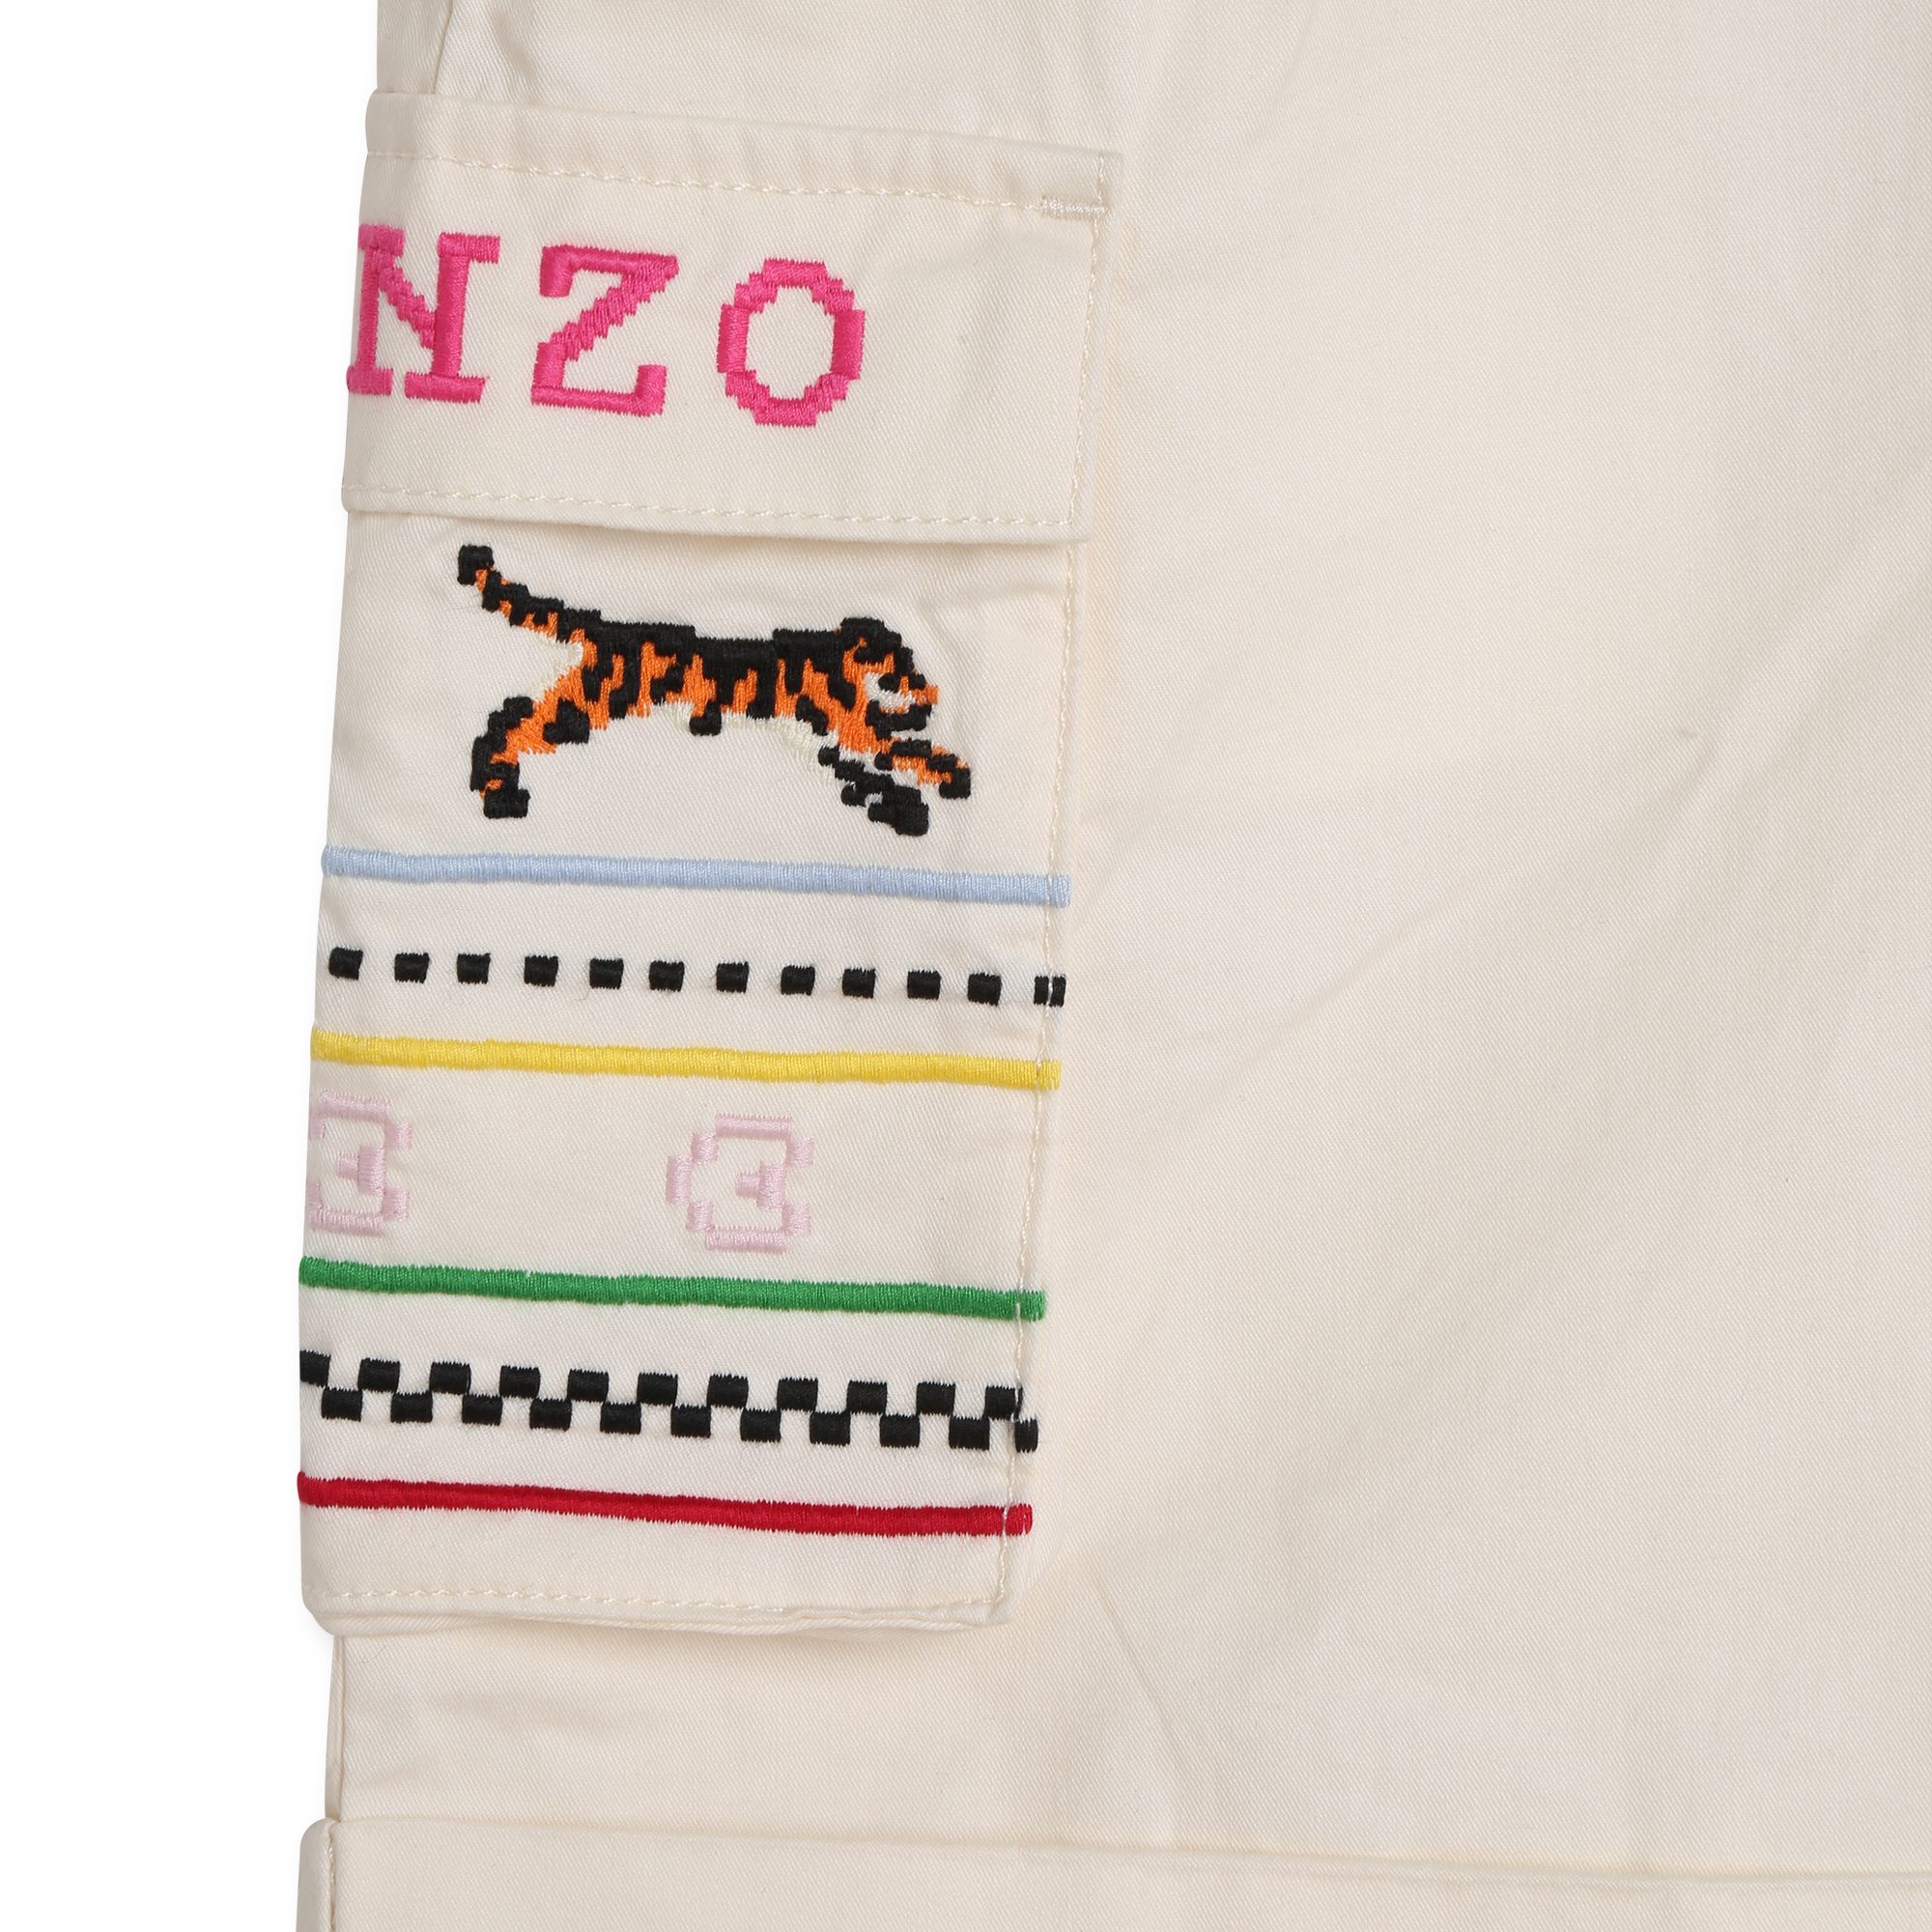 Embroidered cotton shorts KENZO KIDS for GIRL